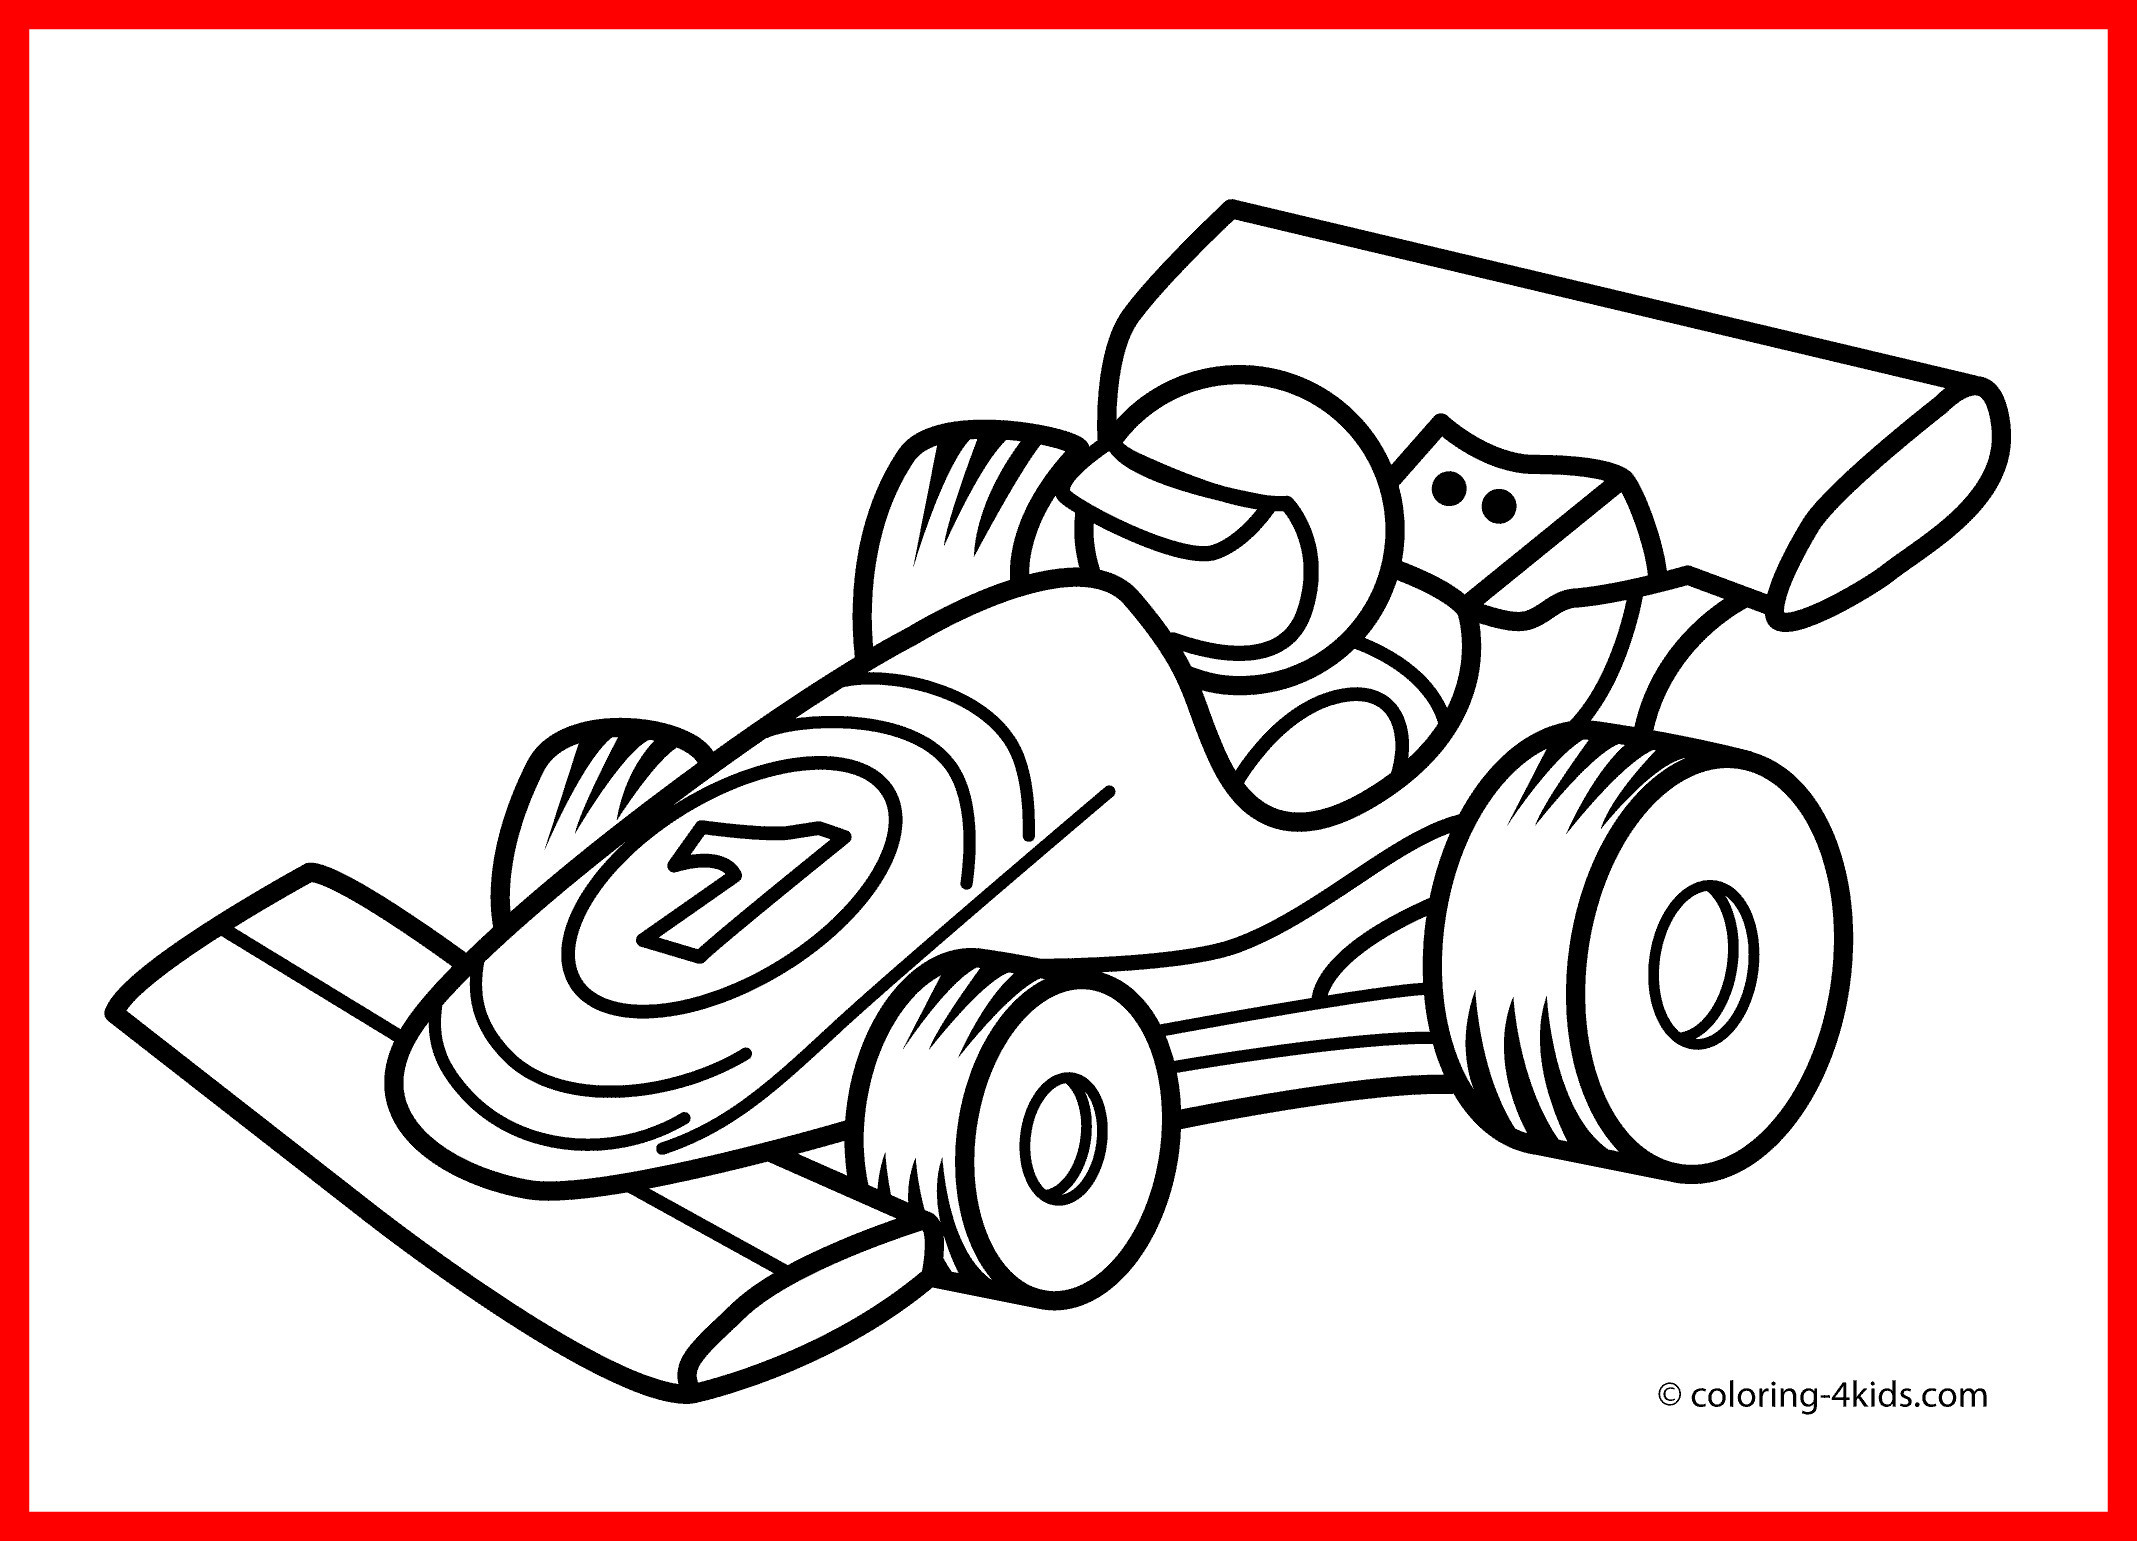 Drag Car Coloring Pages Page 82 Abkerrink Coloring Print Out For Free Printable Flower